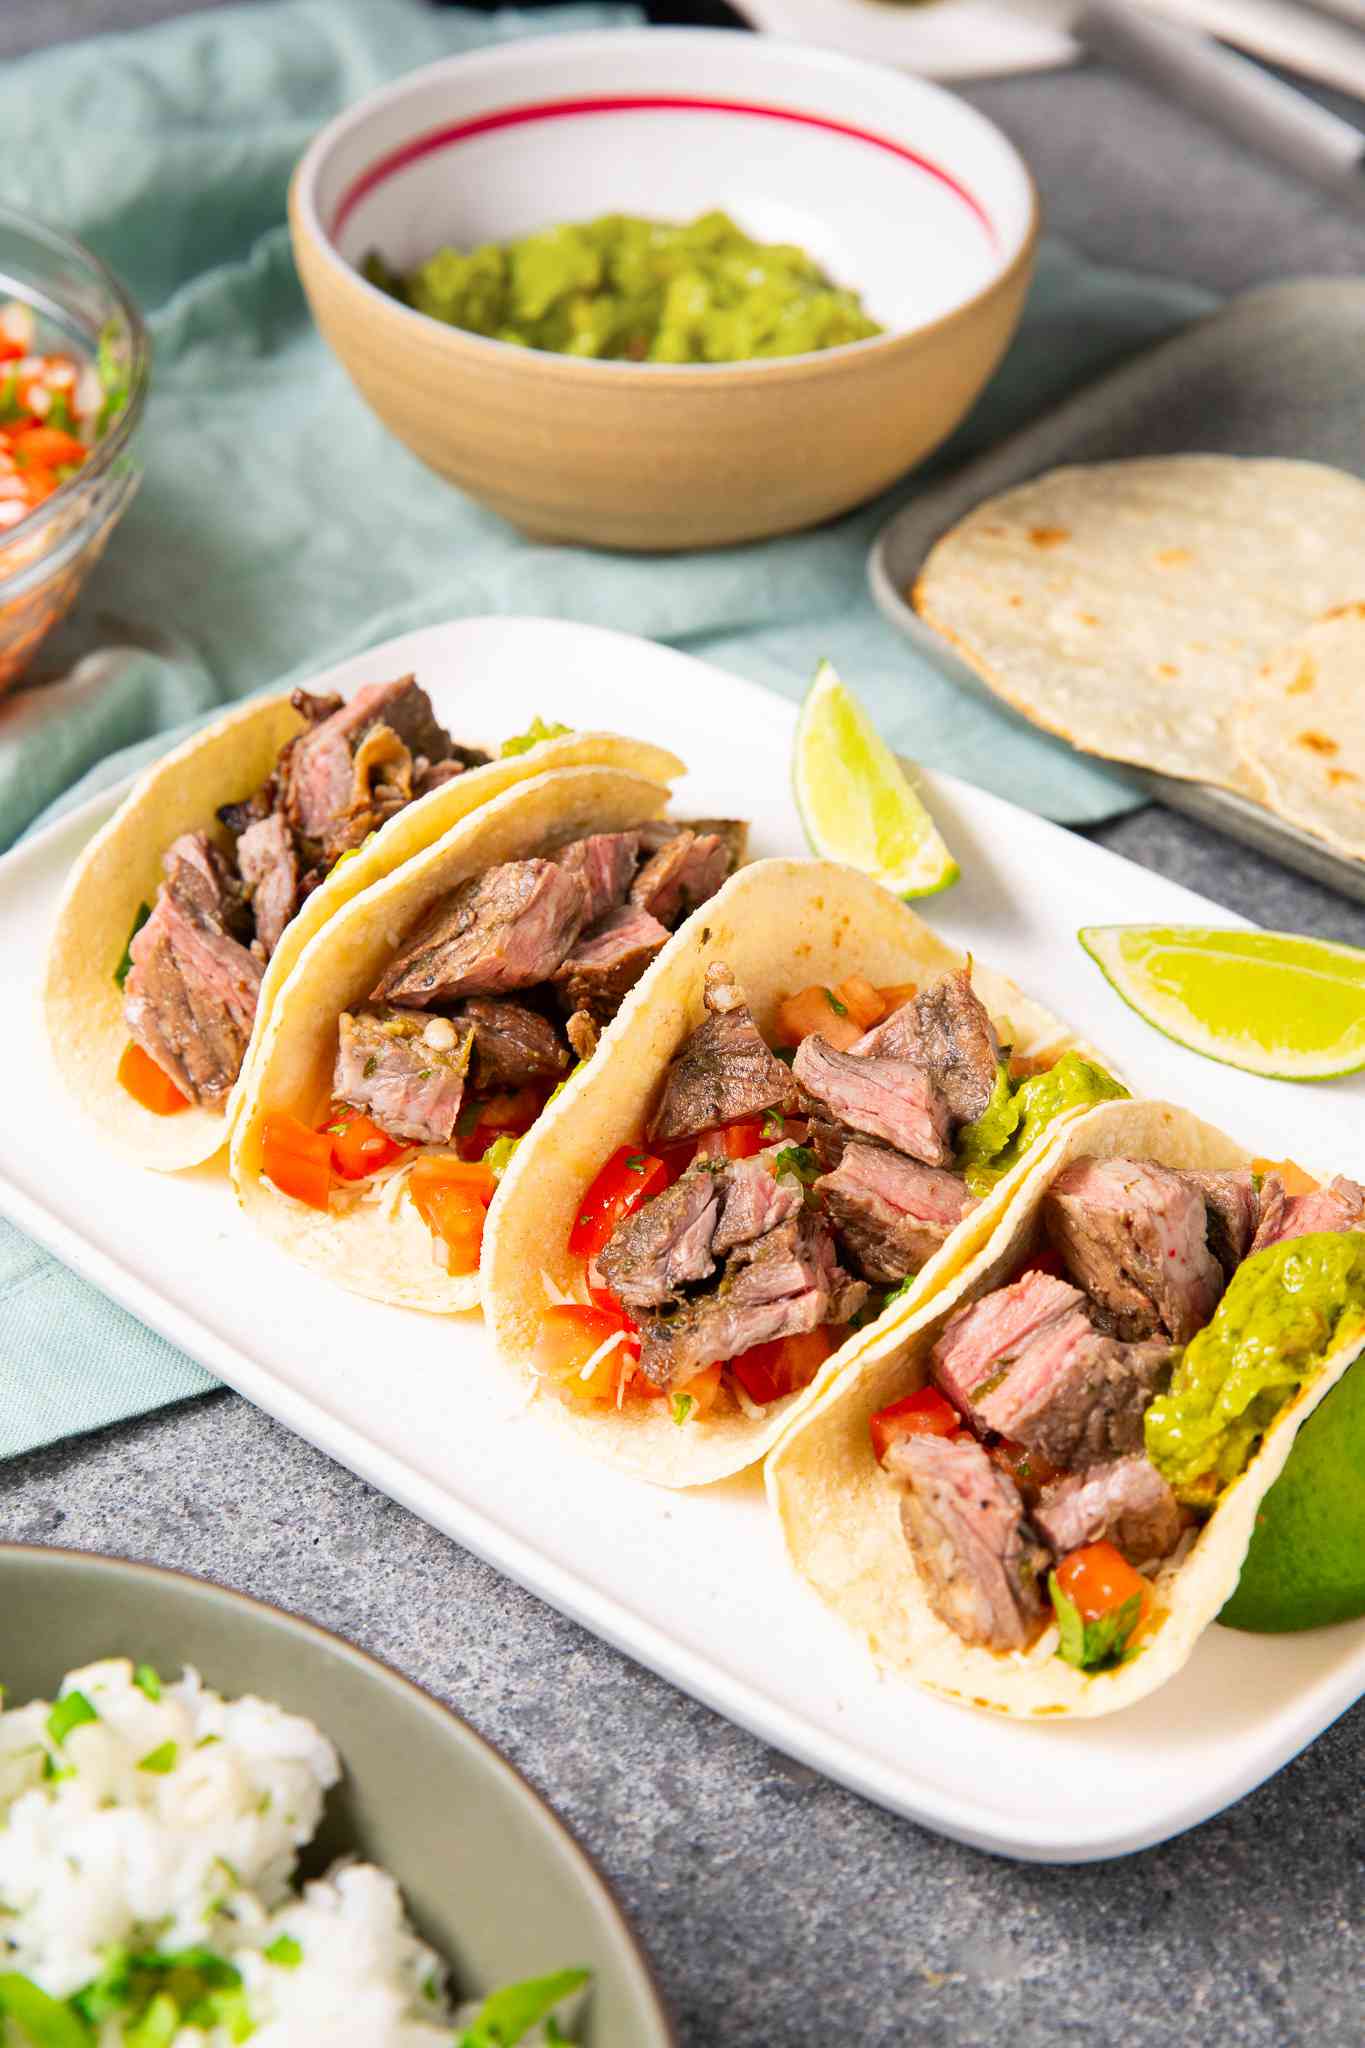 Platter of Arrachera (Mexican Skirt Steak) Tacos With Lime Wedges, and in the Surroundings, a Bowl of Cilantro Rice, a Bowl of Salsa, a Bowl of Guacamole, and a Tray of Tortillas, All on a Light Teal Kitchen Towel